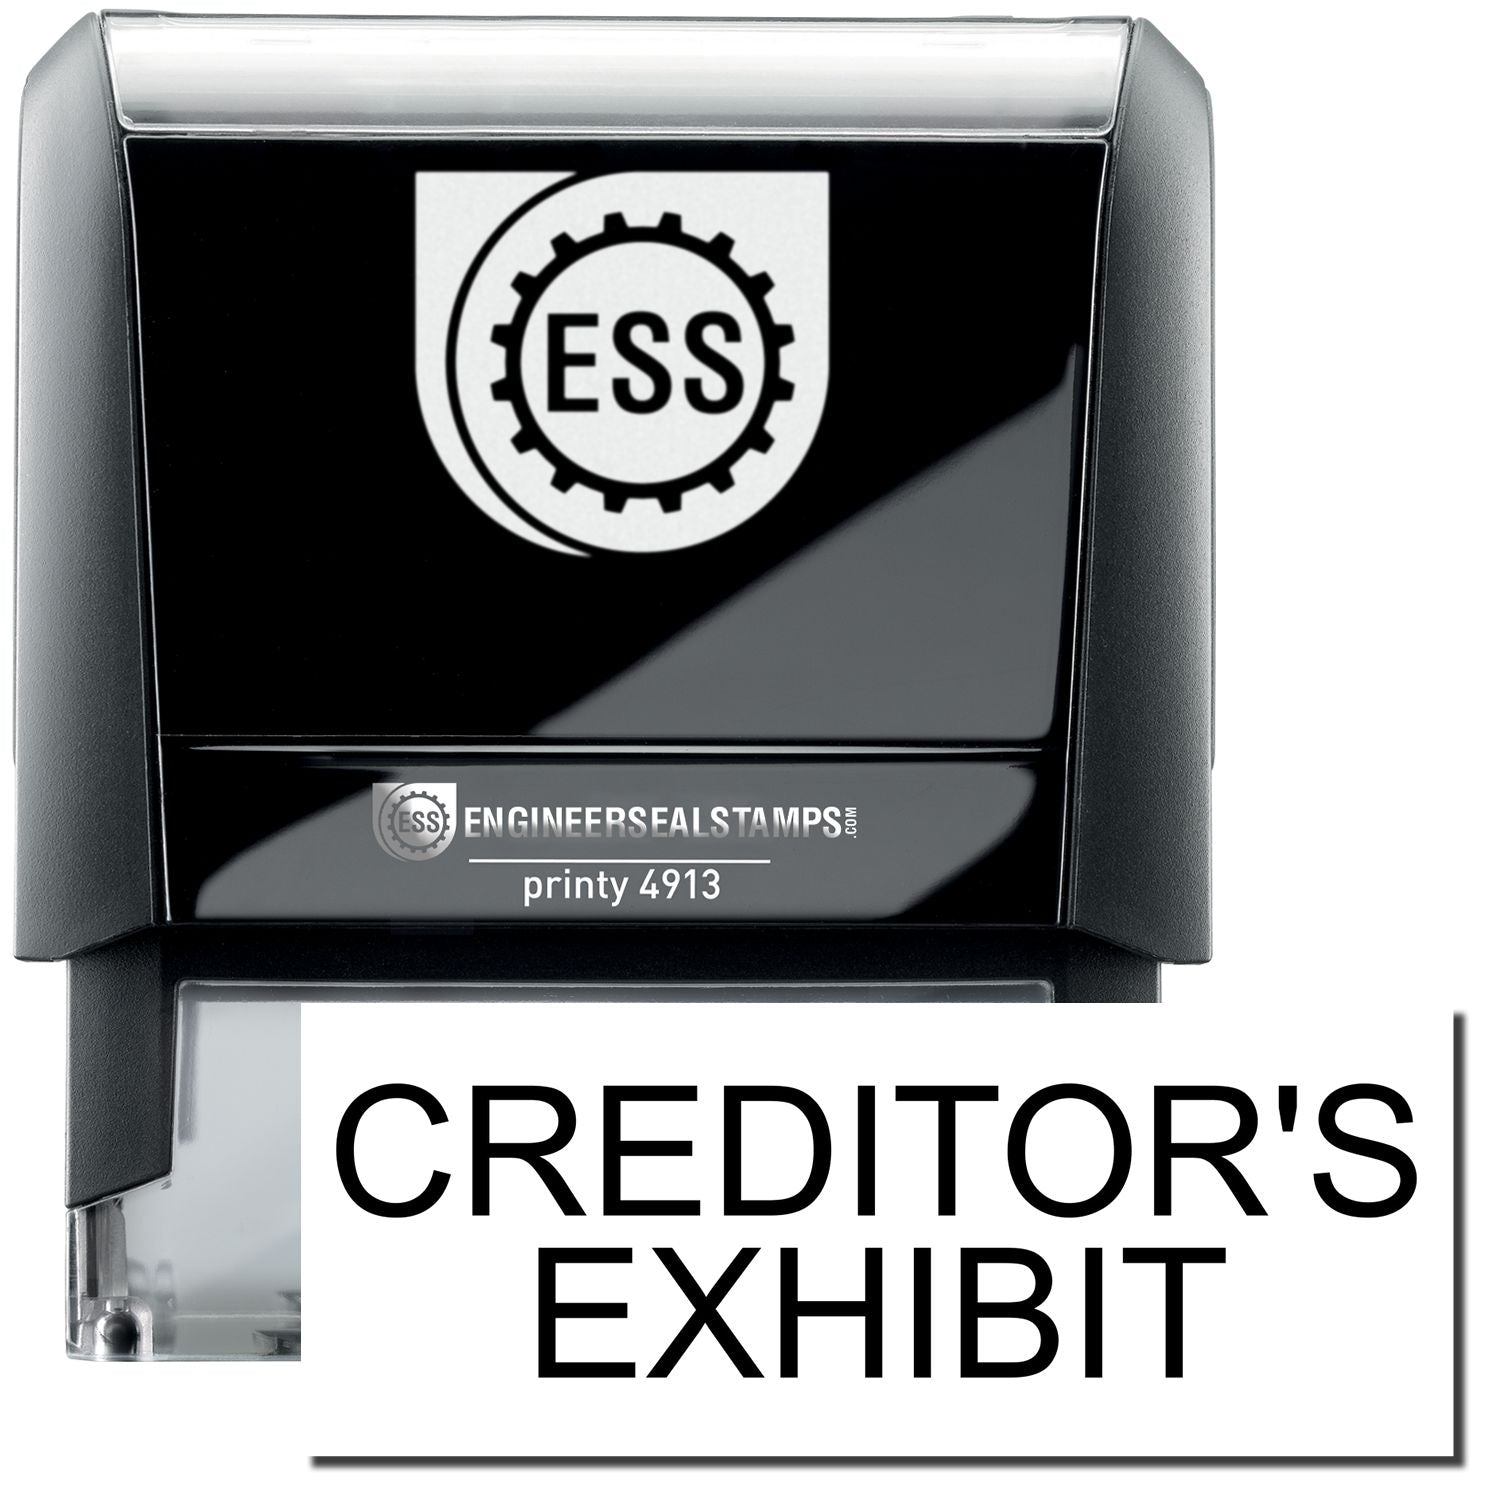 A self-inking stamp with a stamped image showing how the text "CREDITOR'S EXHIBIT" in a large bold font is displayed by it.